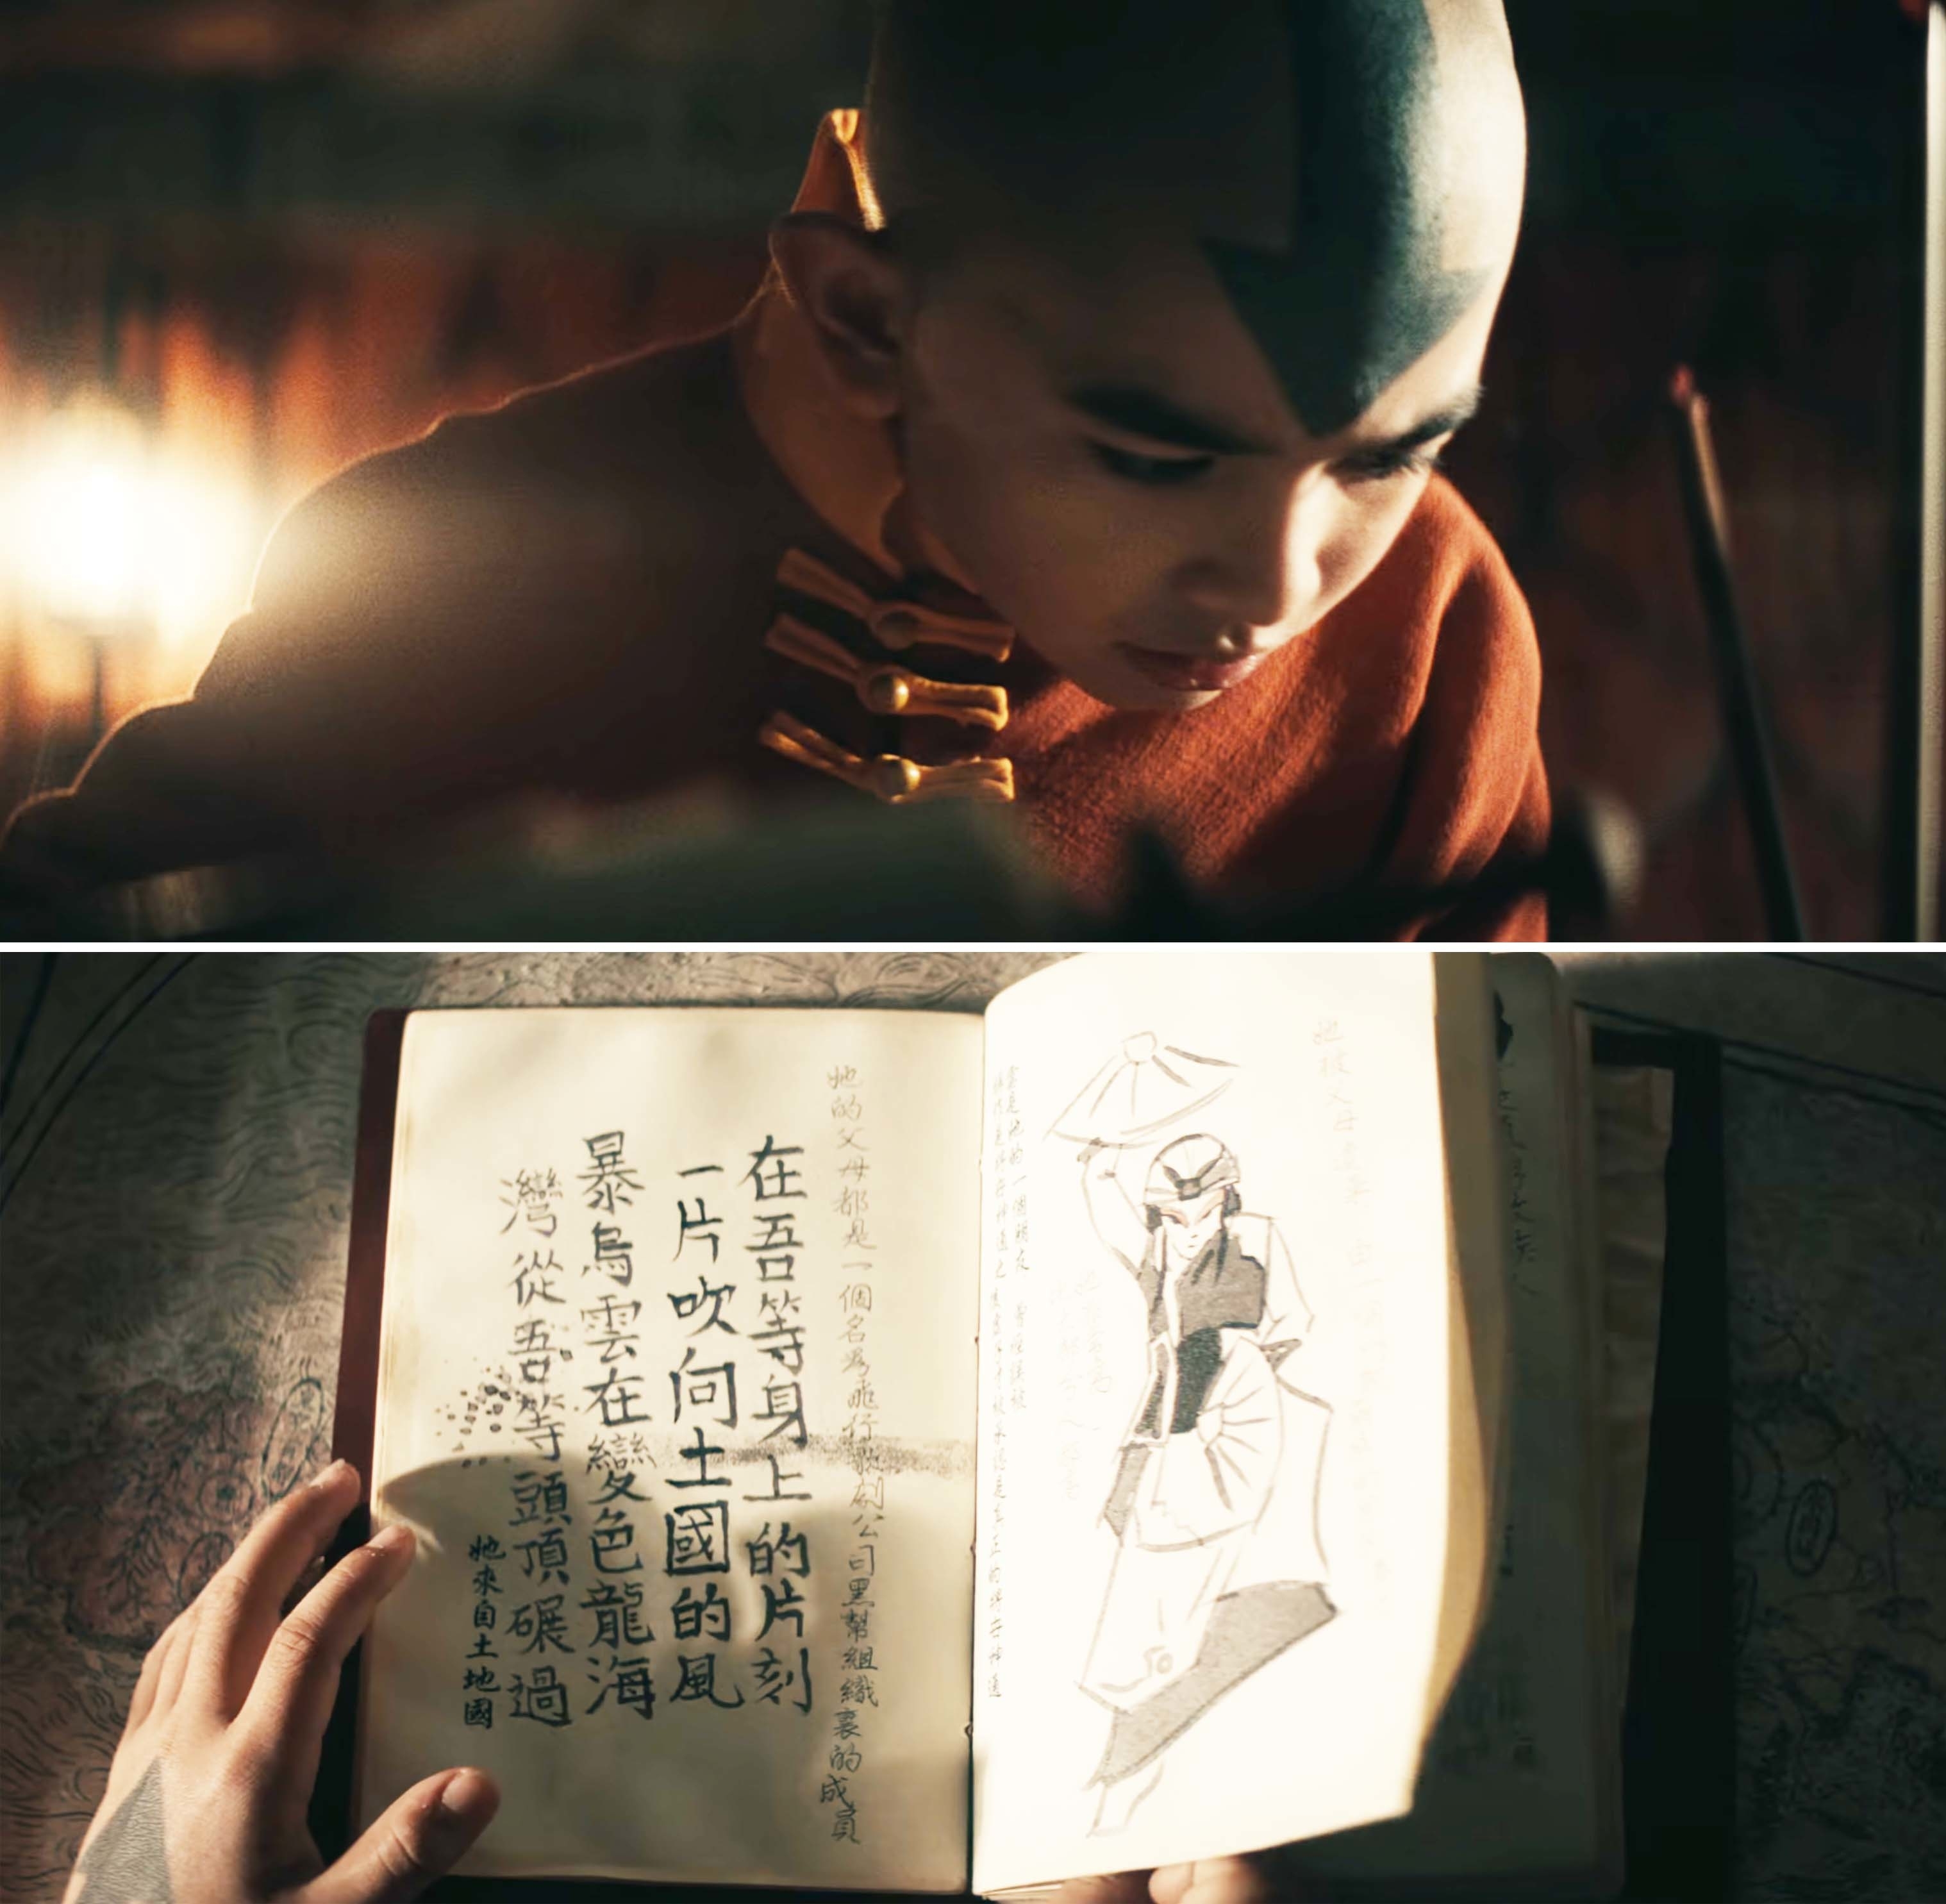 Character Aang from &#x27;Avatar: The Last Airbender&#x27; studies an ancient book with illustrations and text